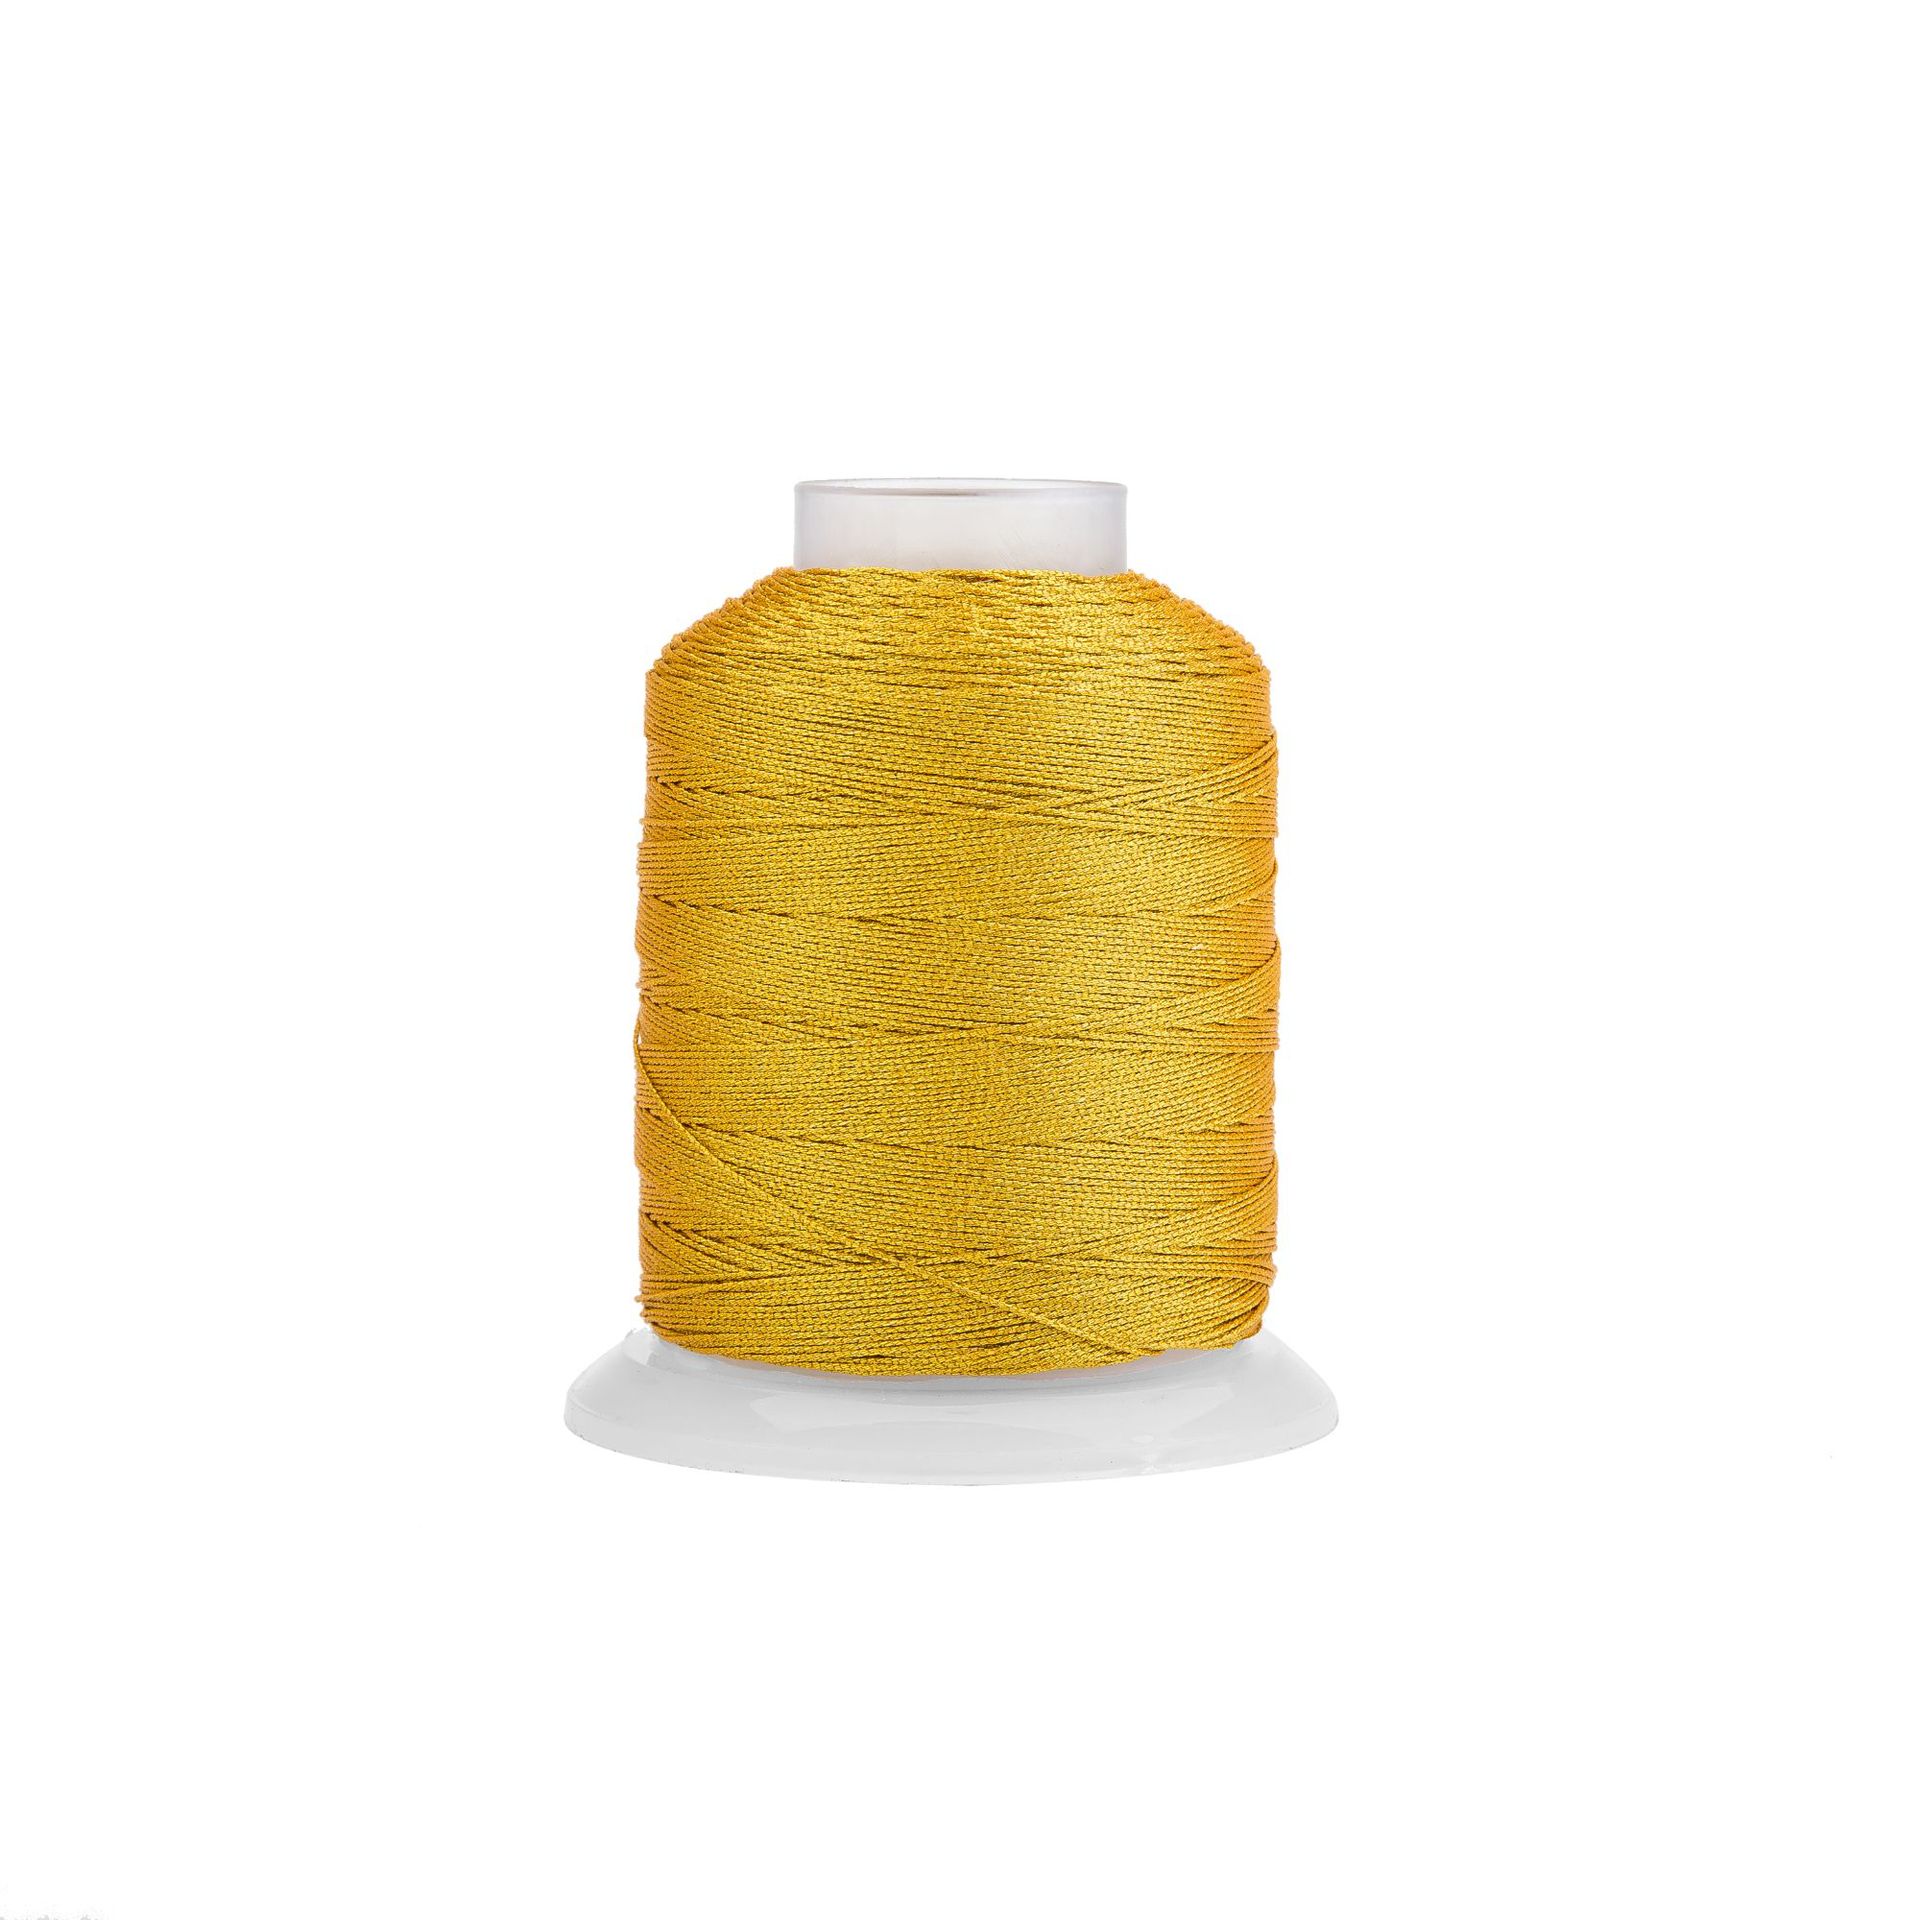 Jr Film-Added Short Stout Rolls of Gold Thread Color Gold Thread Thread Wear-Resistant Non-Fading Non-Scattered Strand 3.6.9.12 Strand DIY Handmade